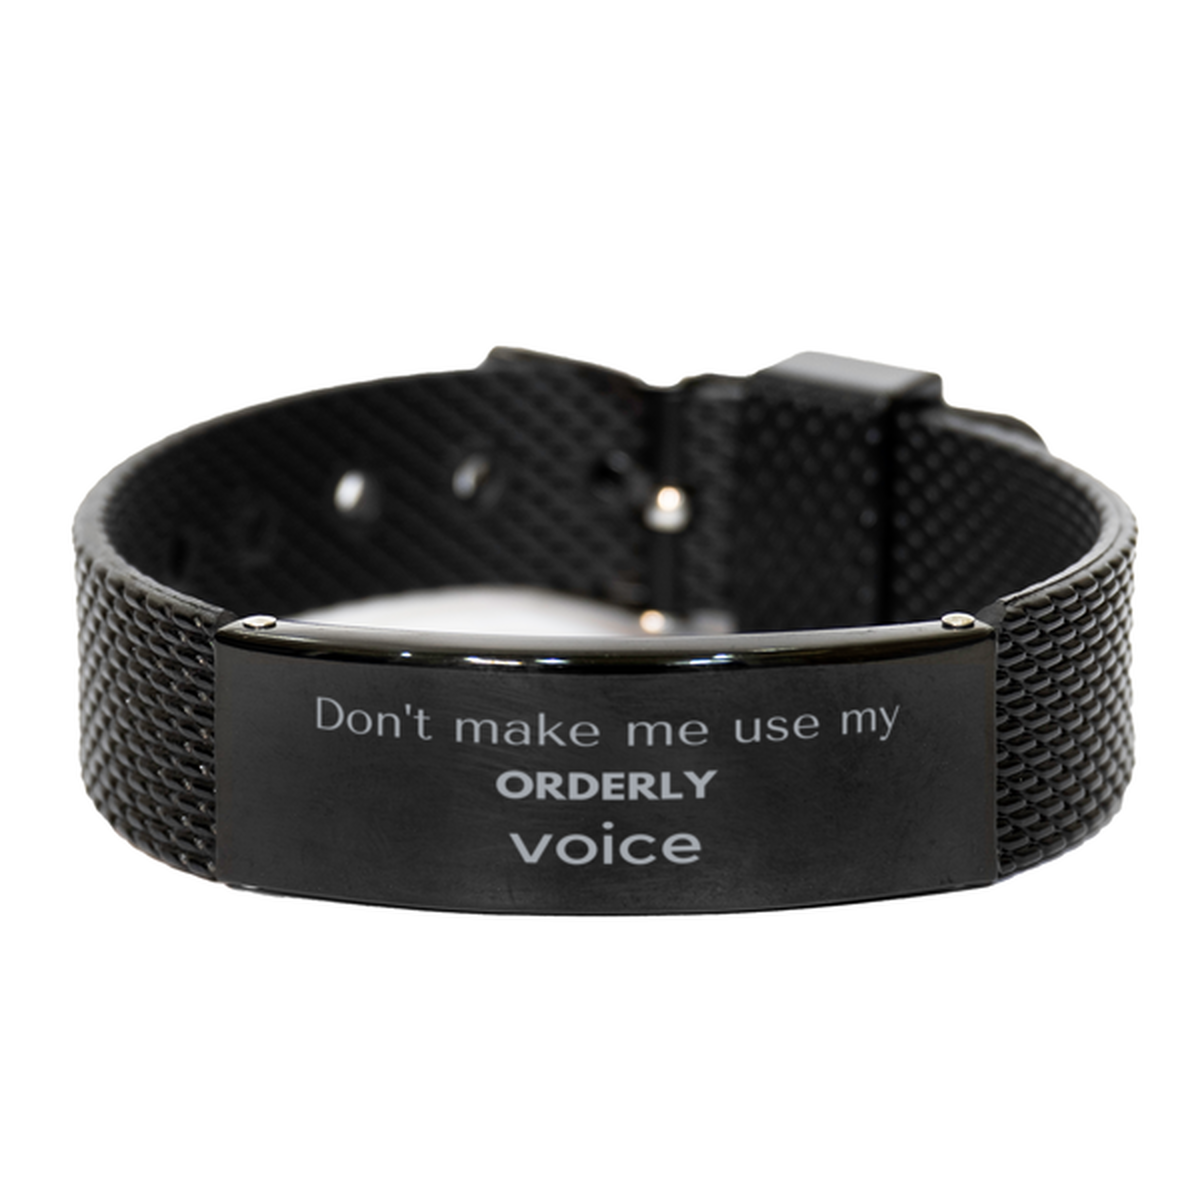 Don't make me use my Orderly voice, Sarcasm Orderly Gifts, Christmas Orderly Black Shark Mesh Bracelet Birthday Unique Gifts For Orderly Coworkers, Men, Women, Colleague, Friends